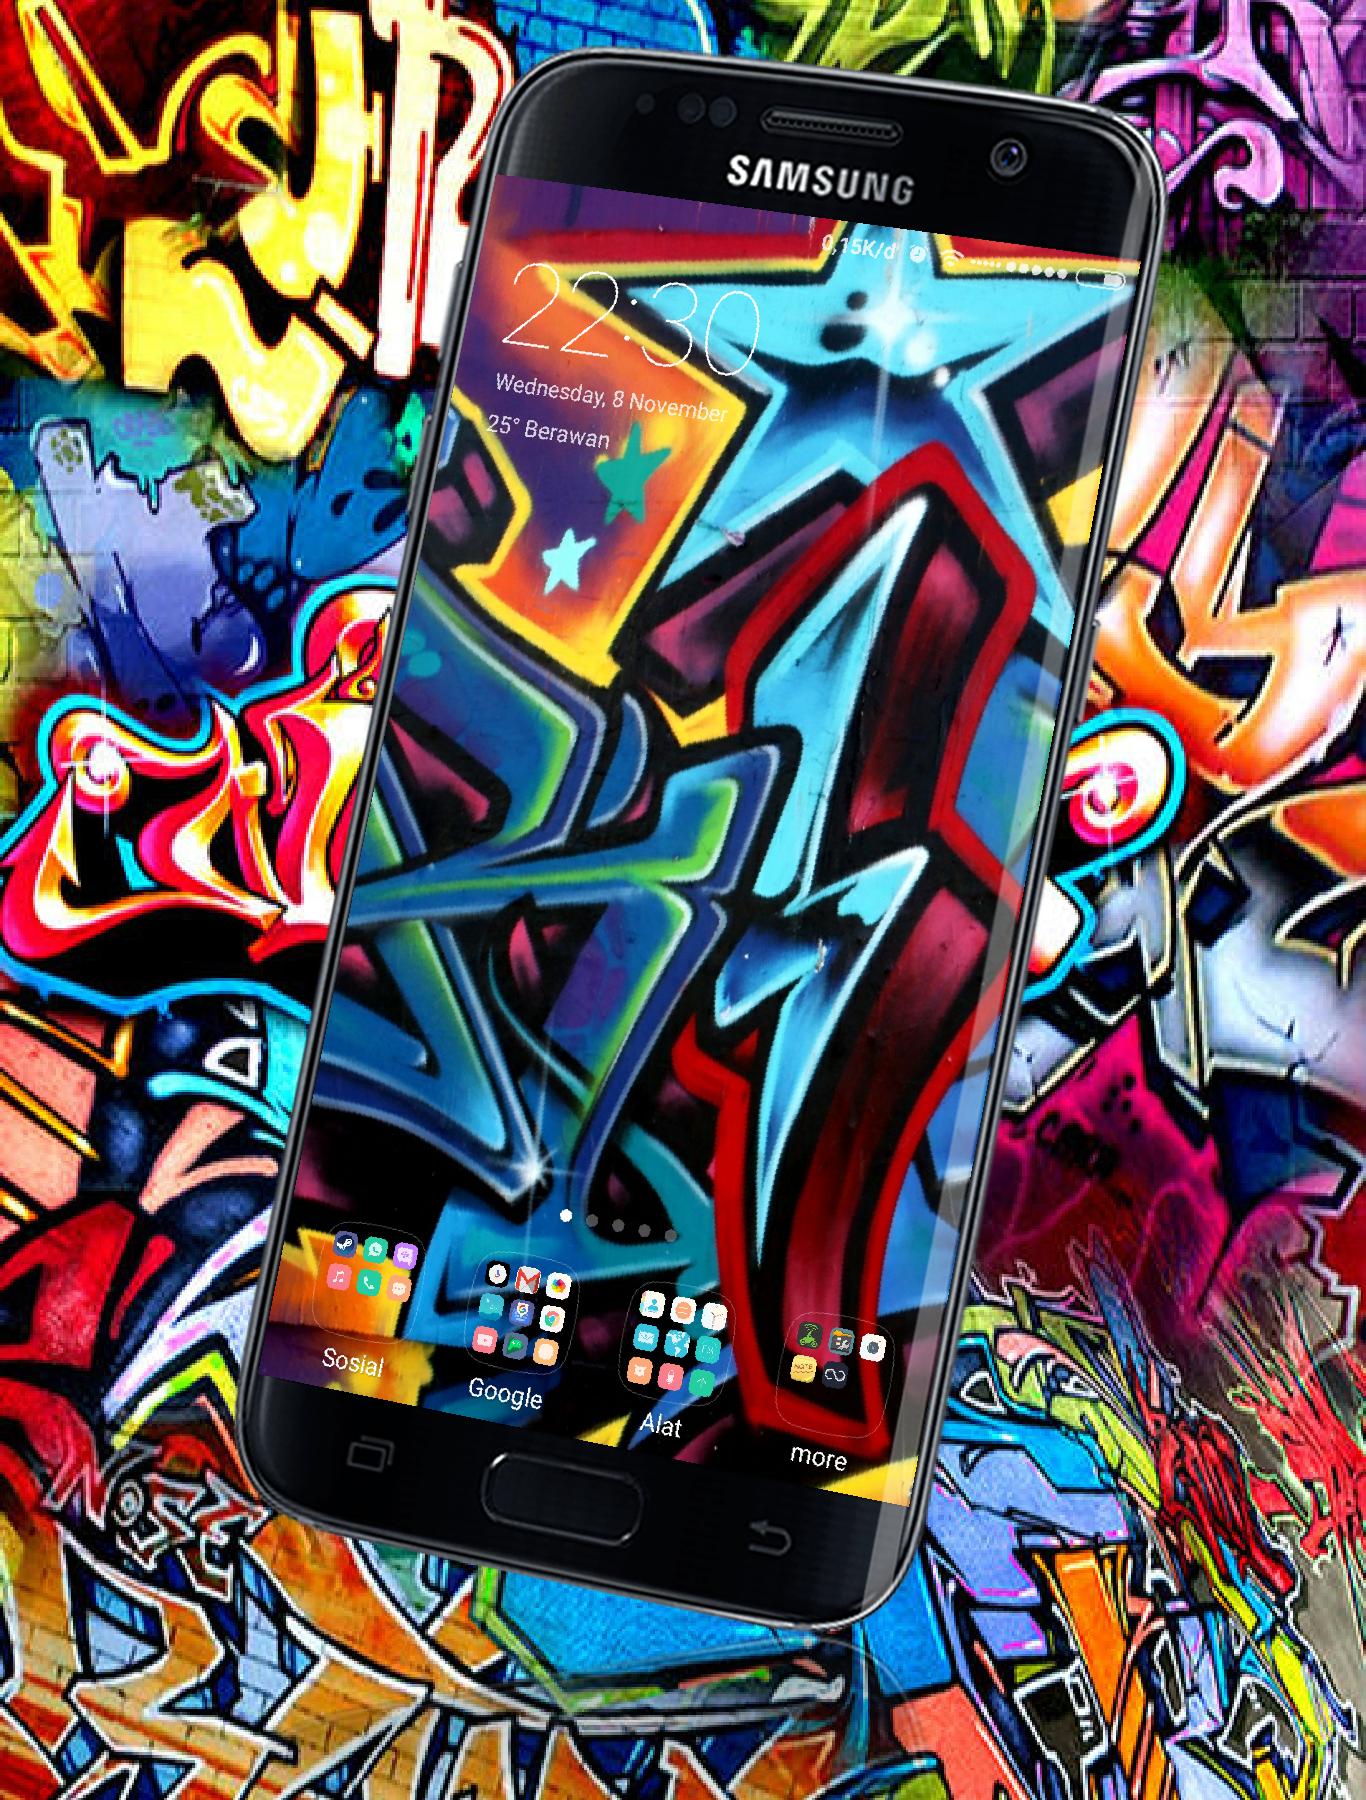  Graffiti  Wallpaper  for Android APK  Download